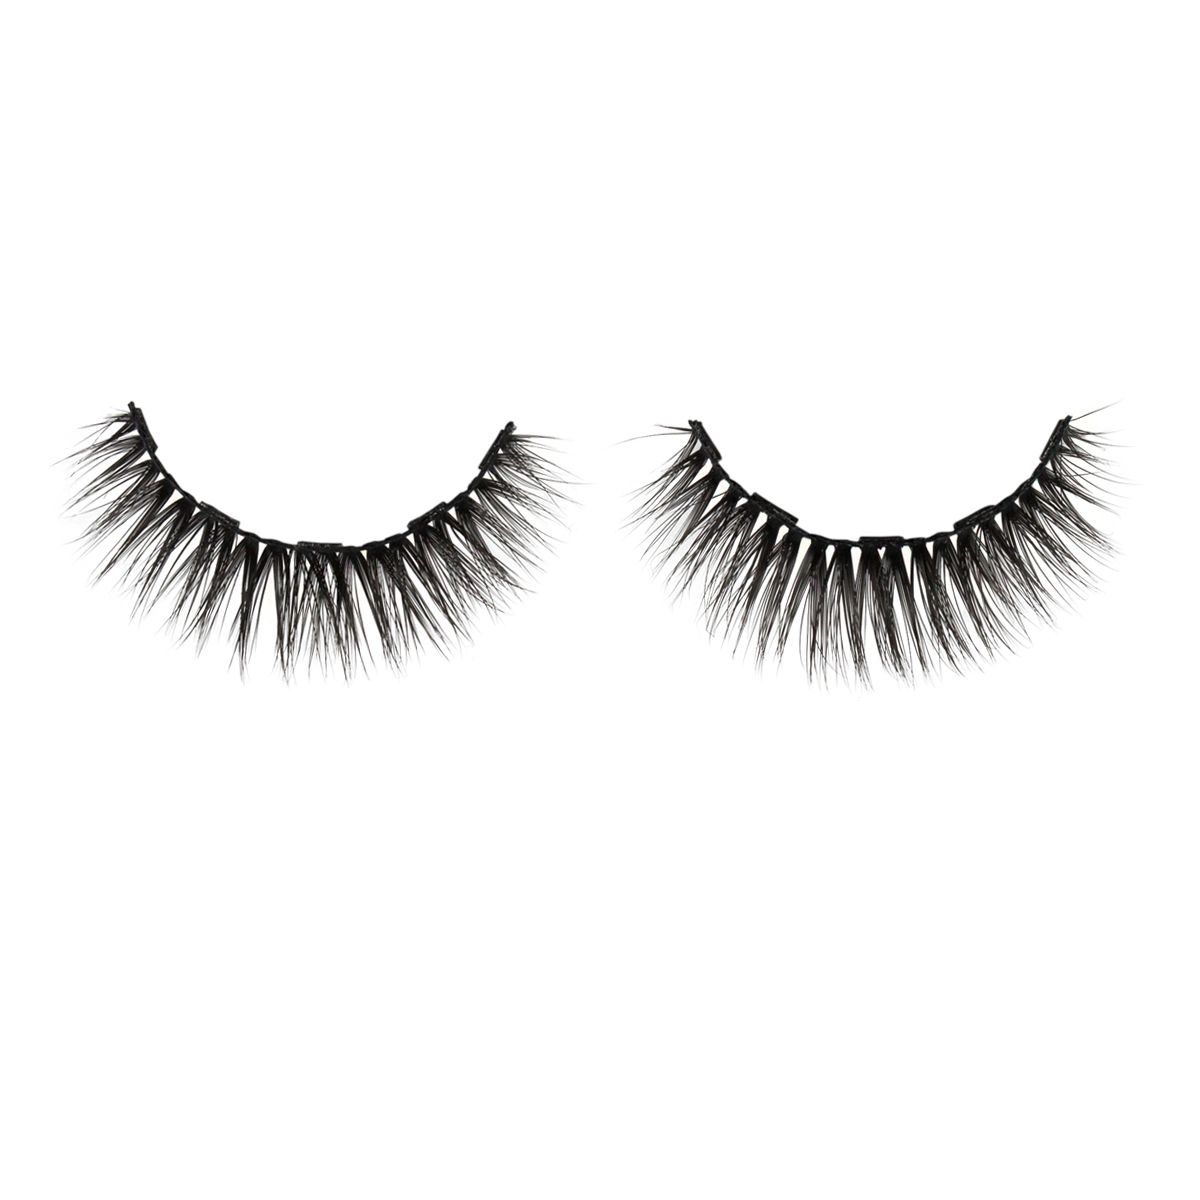 Magnetic Lashes – Magnetwimpern, magnetische Bandwimpern von GL BEAUTY LASHES